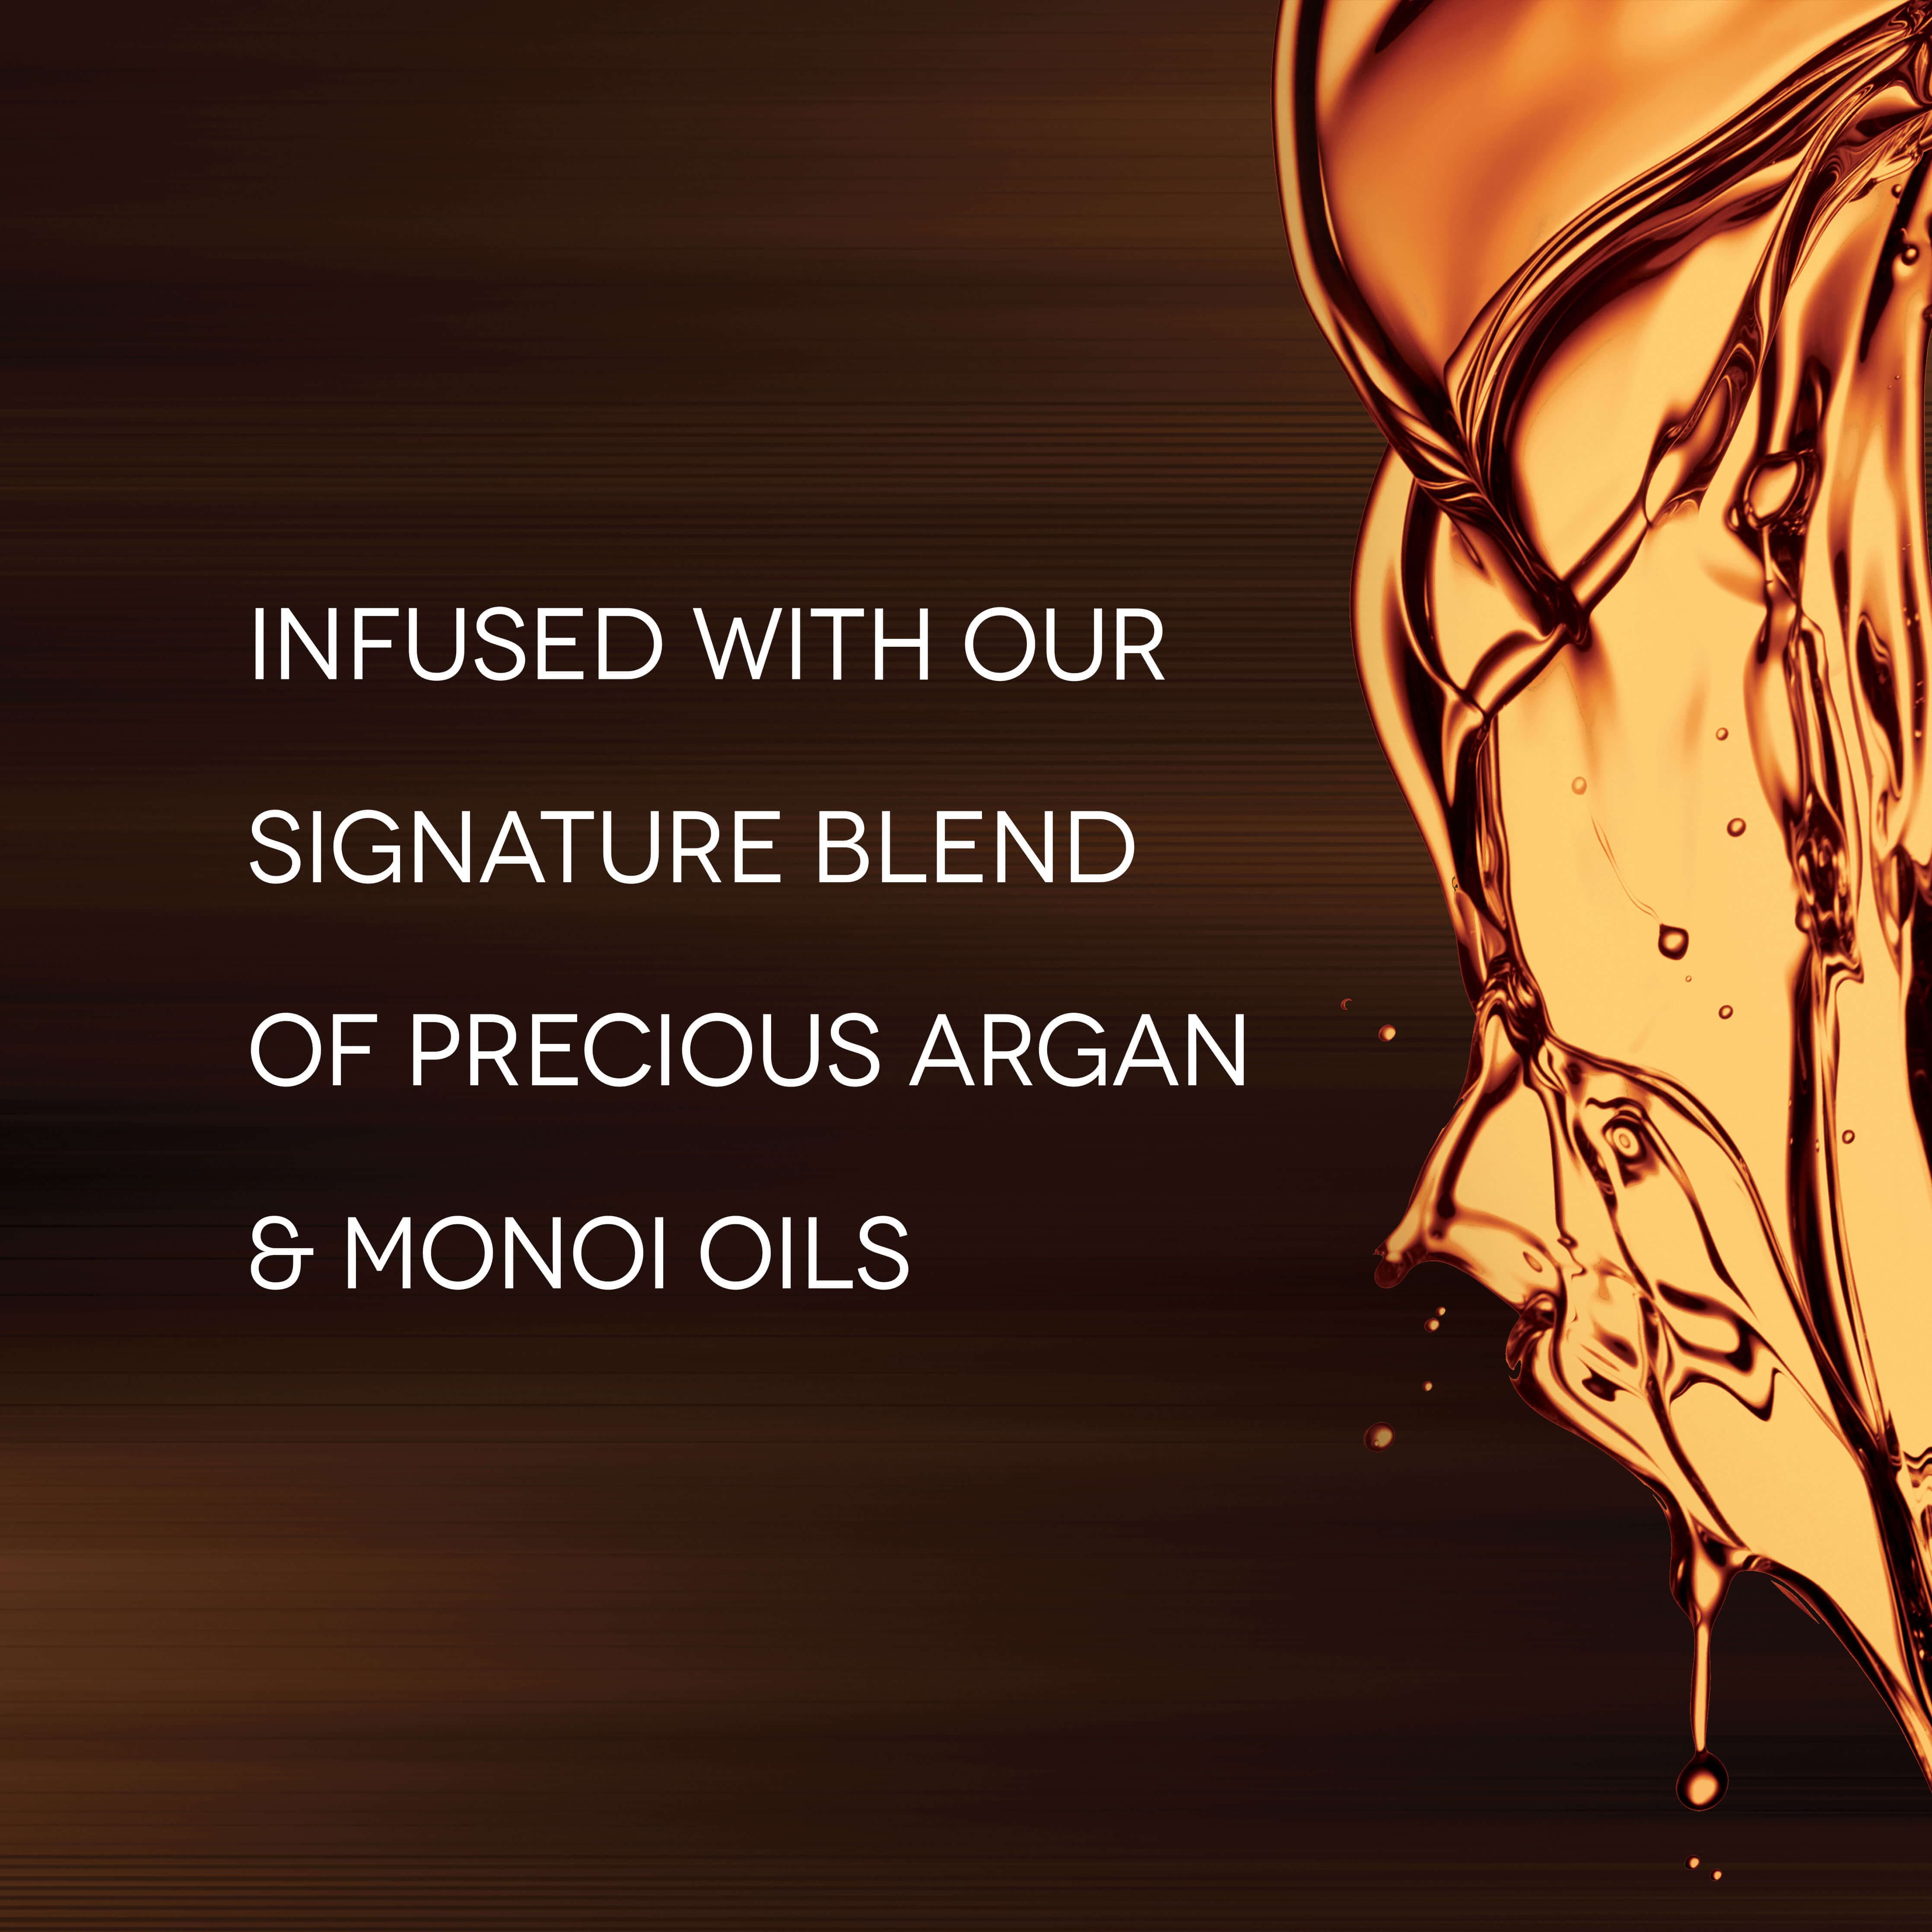 Infused with Our Signature Blend of Precious Argan & Monoi Oils